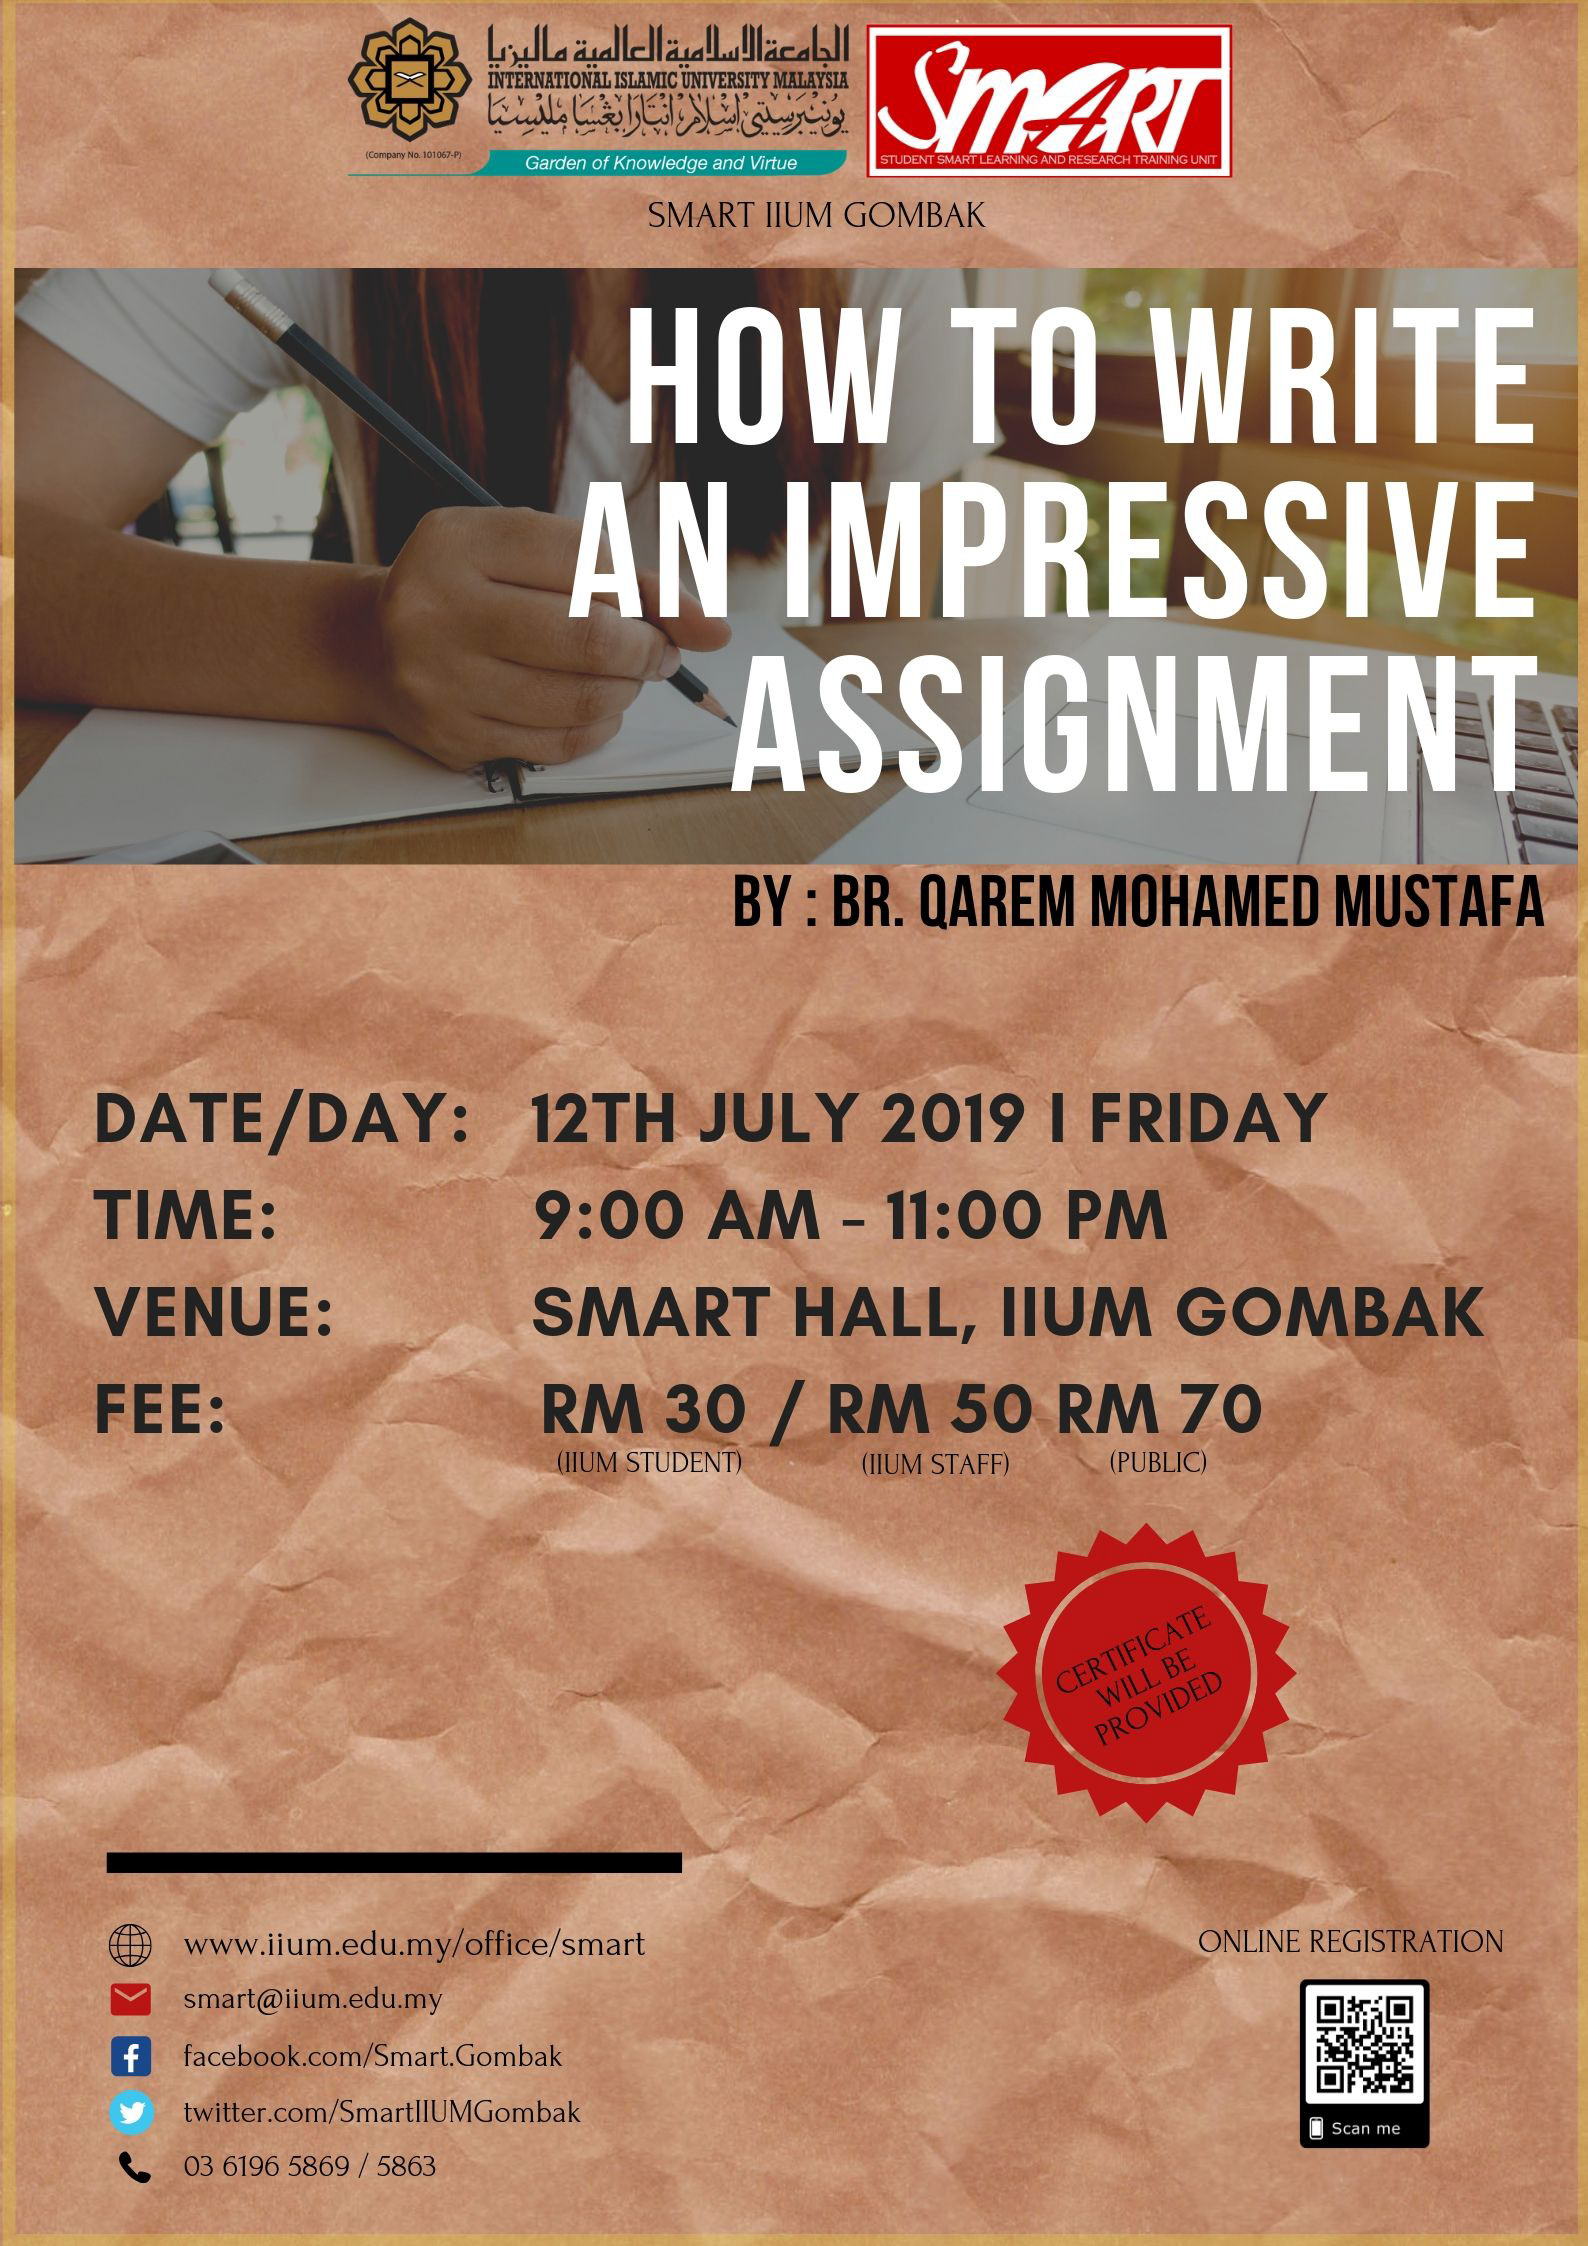 WORKSHOP : HOW TO WRITE AN IMPRESSIVE ASSIGNMENT